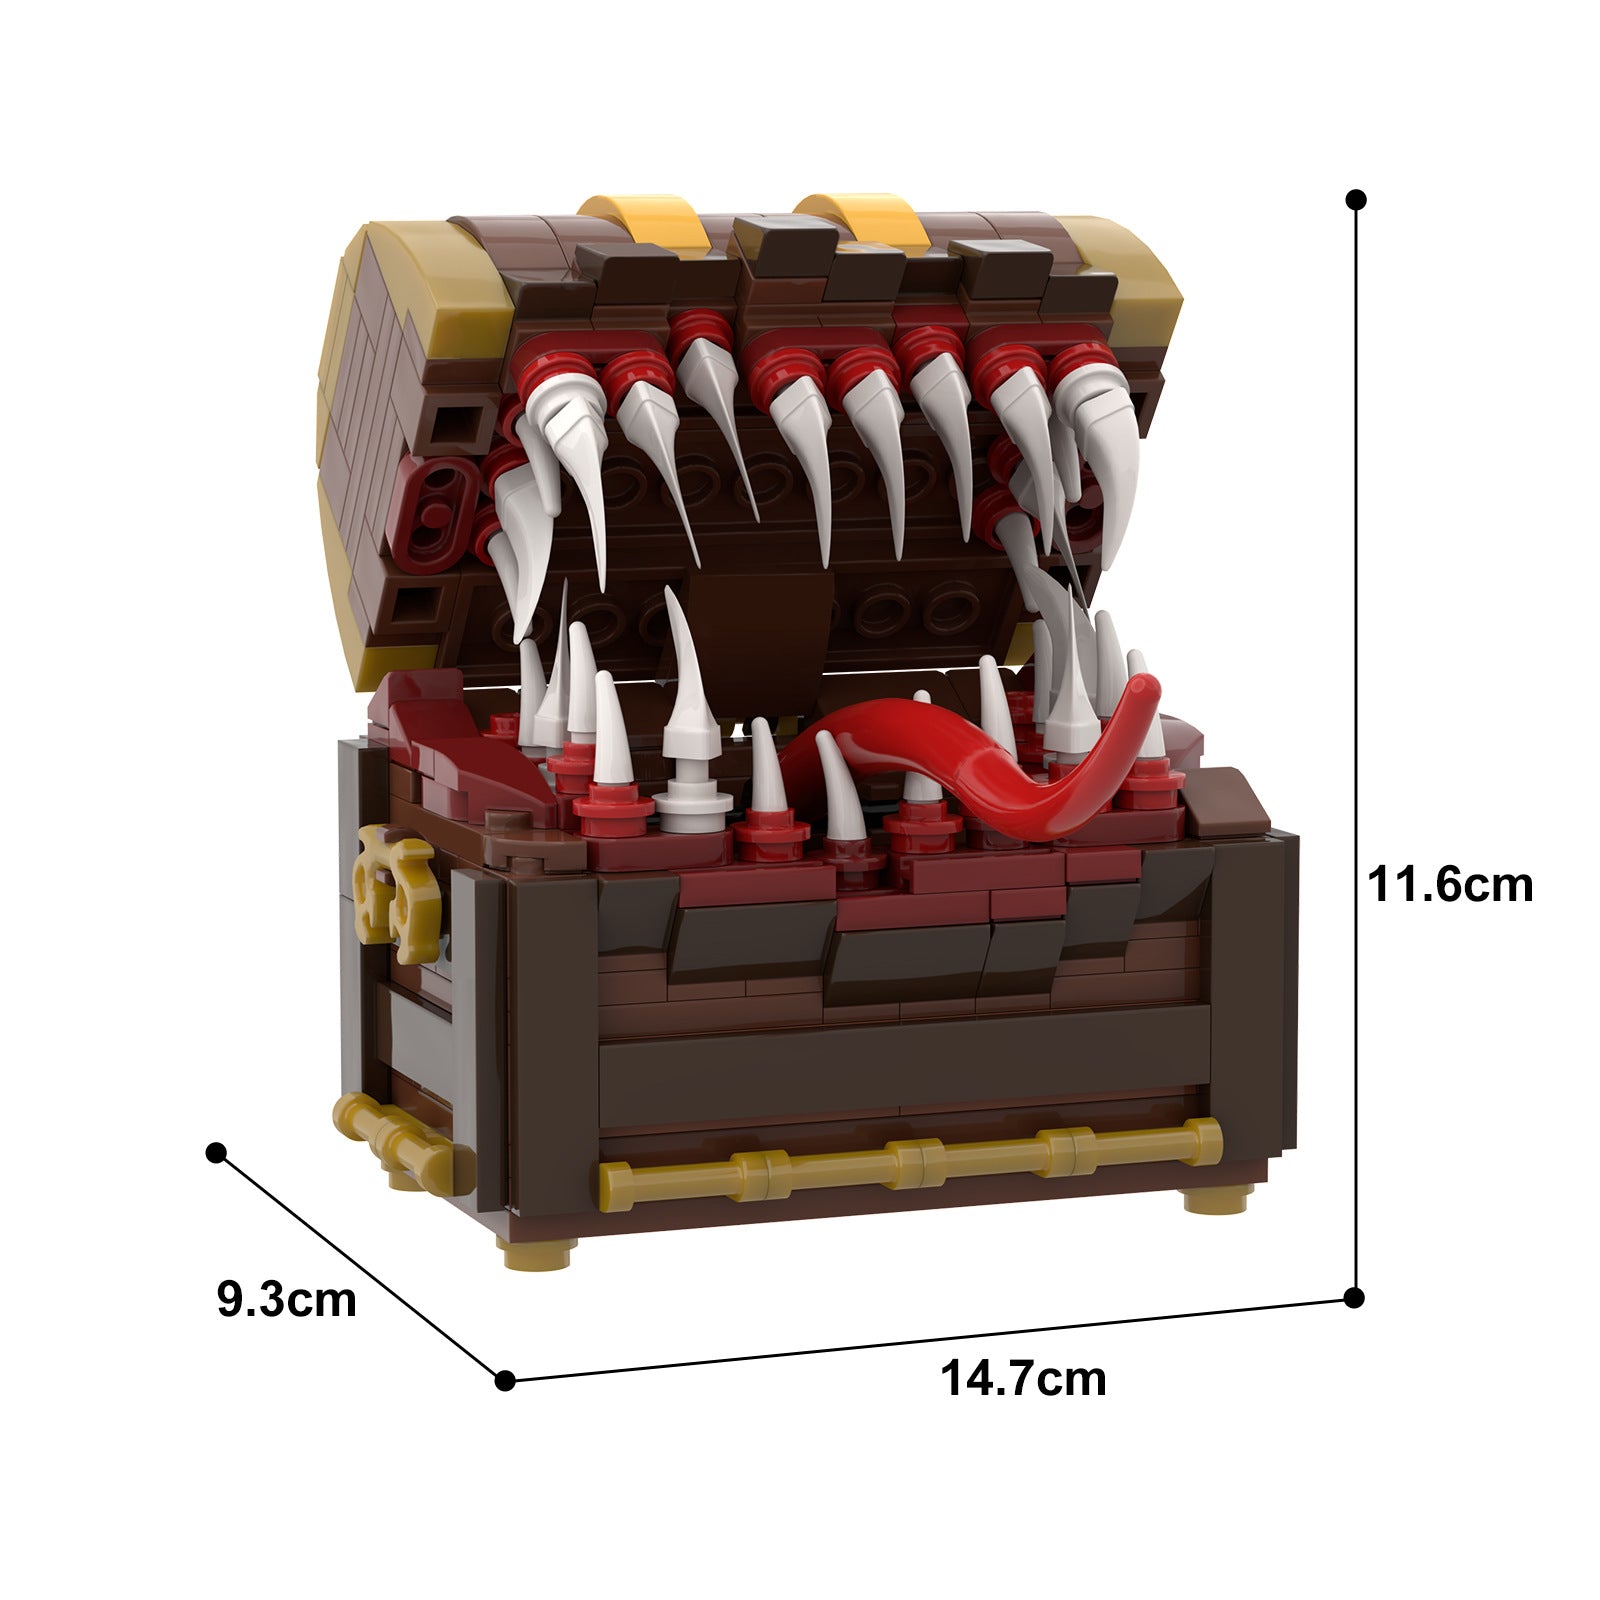 Mimic building block chest, no dungeon is  complete without one-DungeonDice1